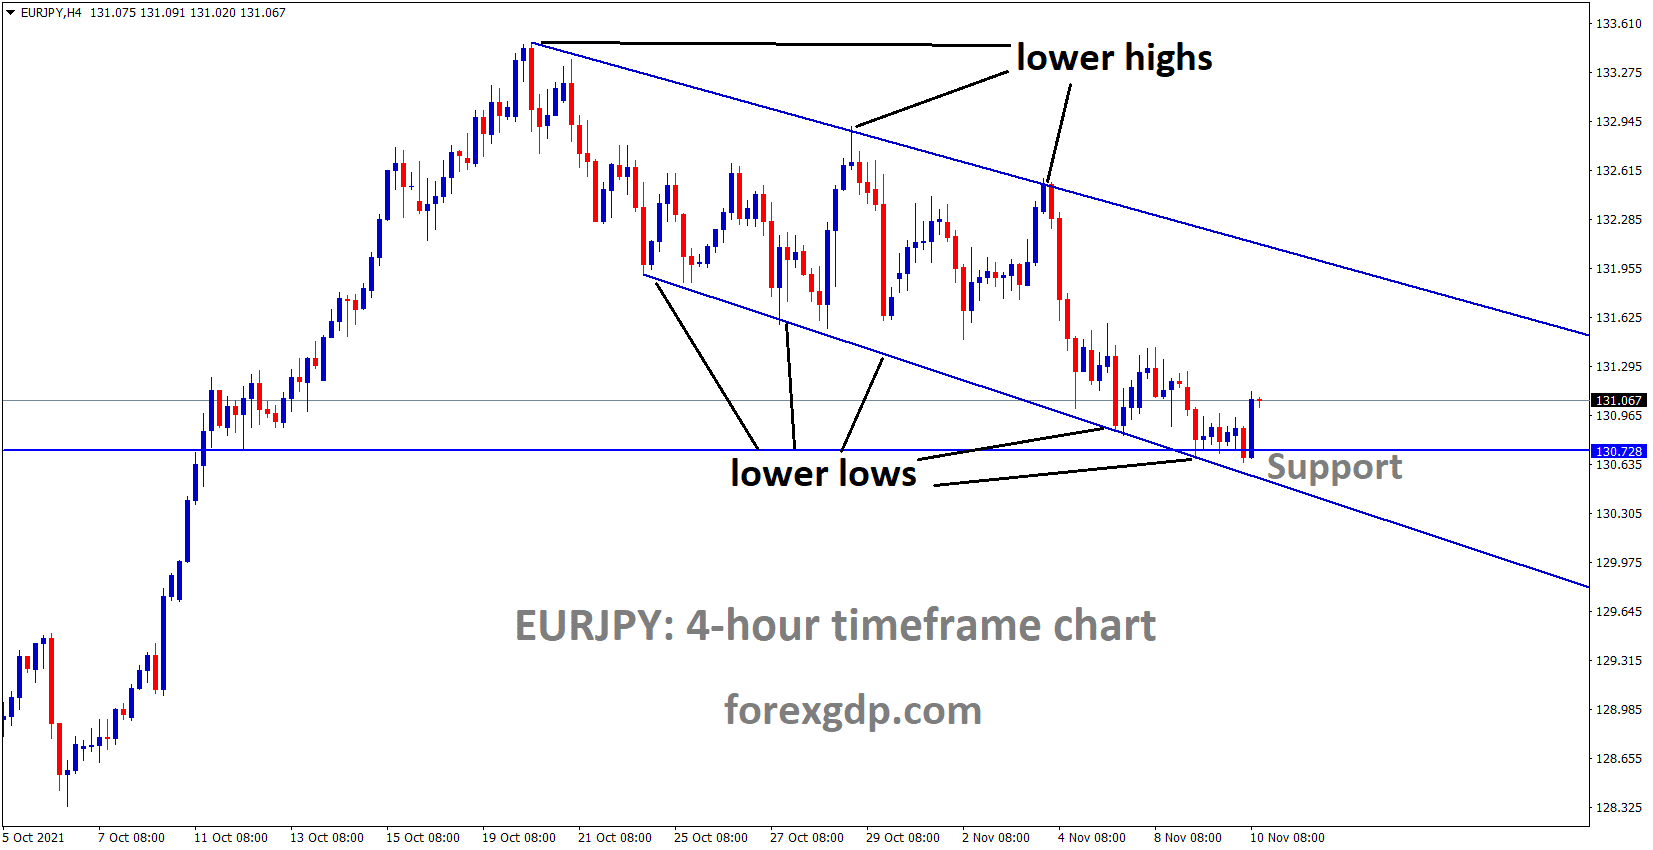 EURJPY is moving in the Descending channel and the market is rebounded from the lower low area and previous support area